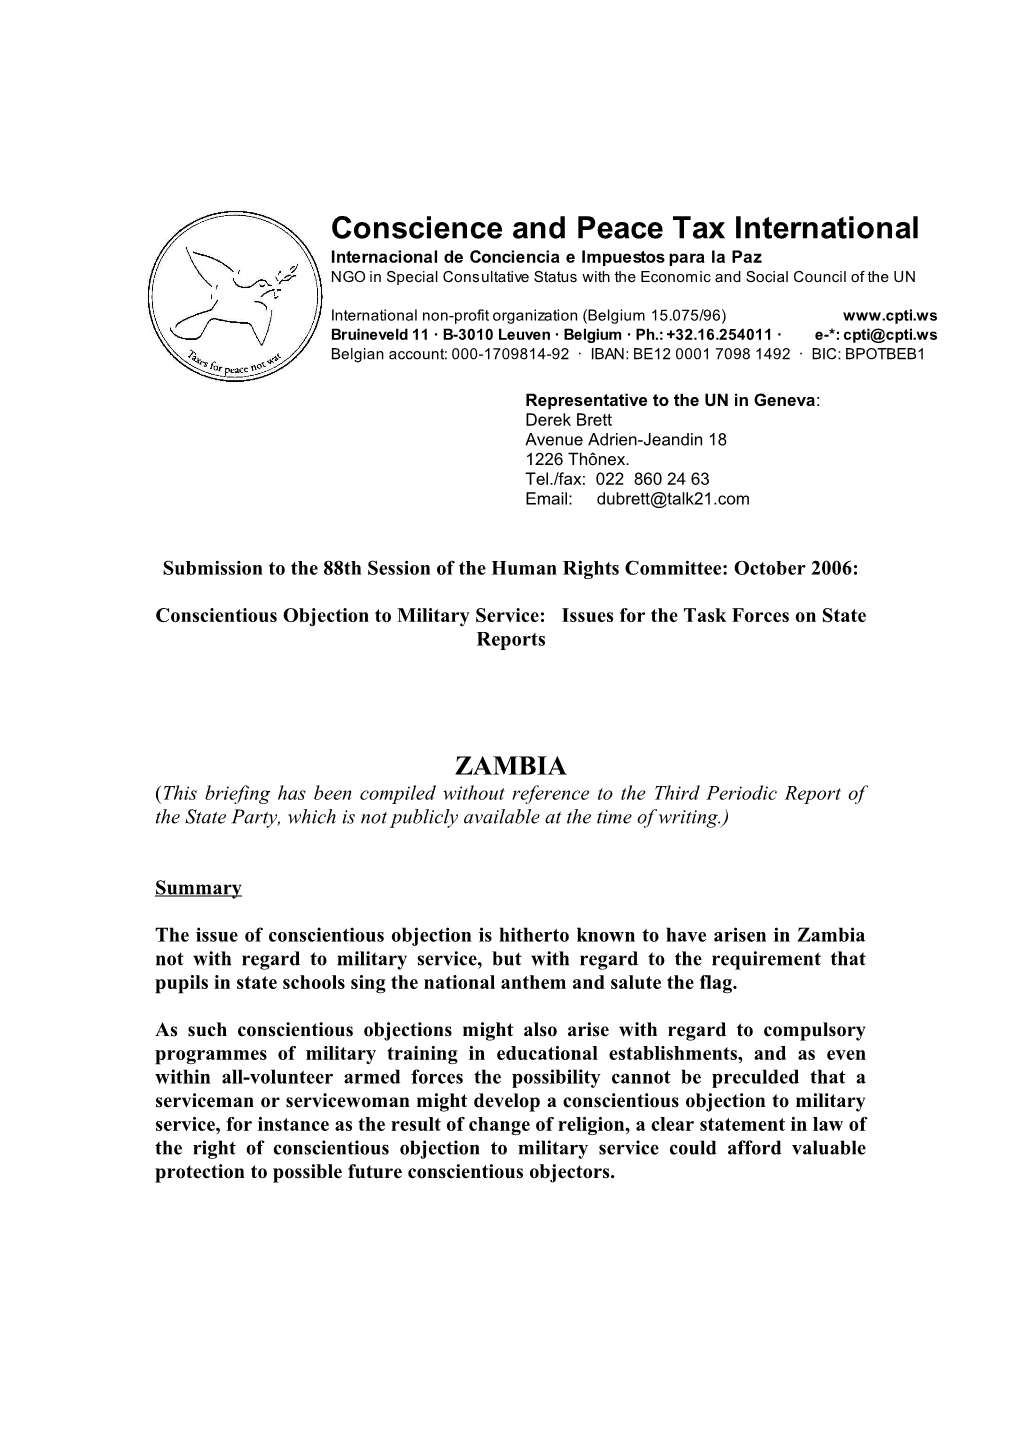 Conscientious Objection to Military Service: Issues for the Task Forces on State Reports